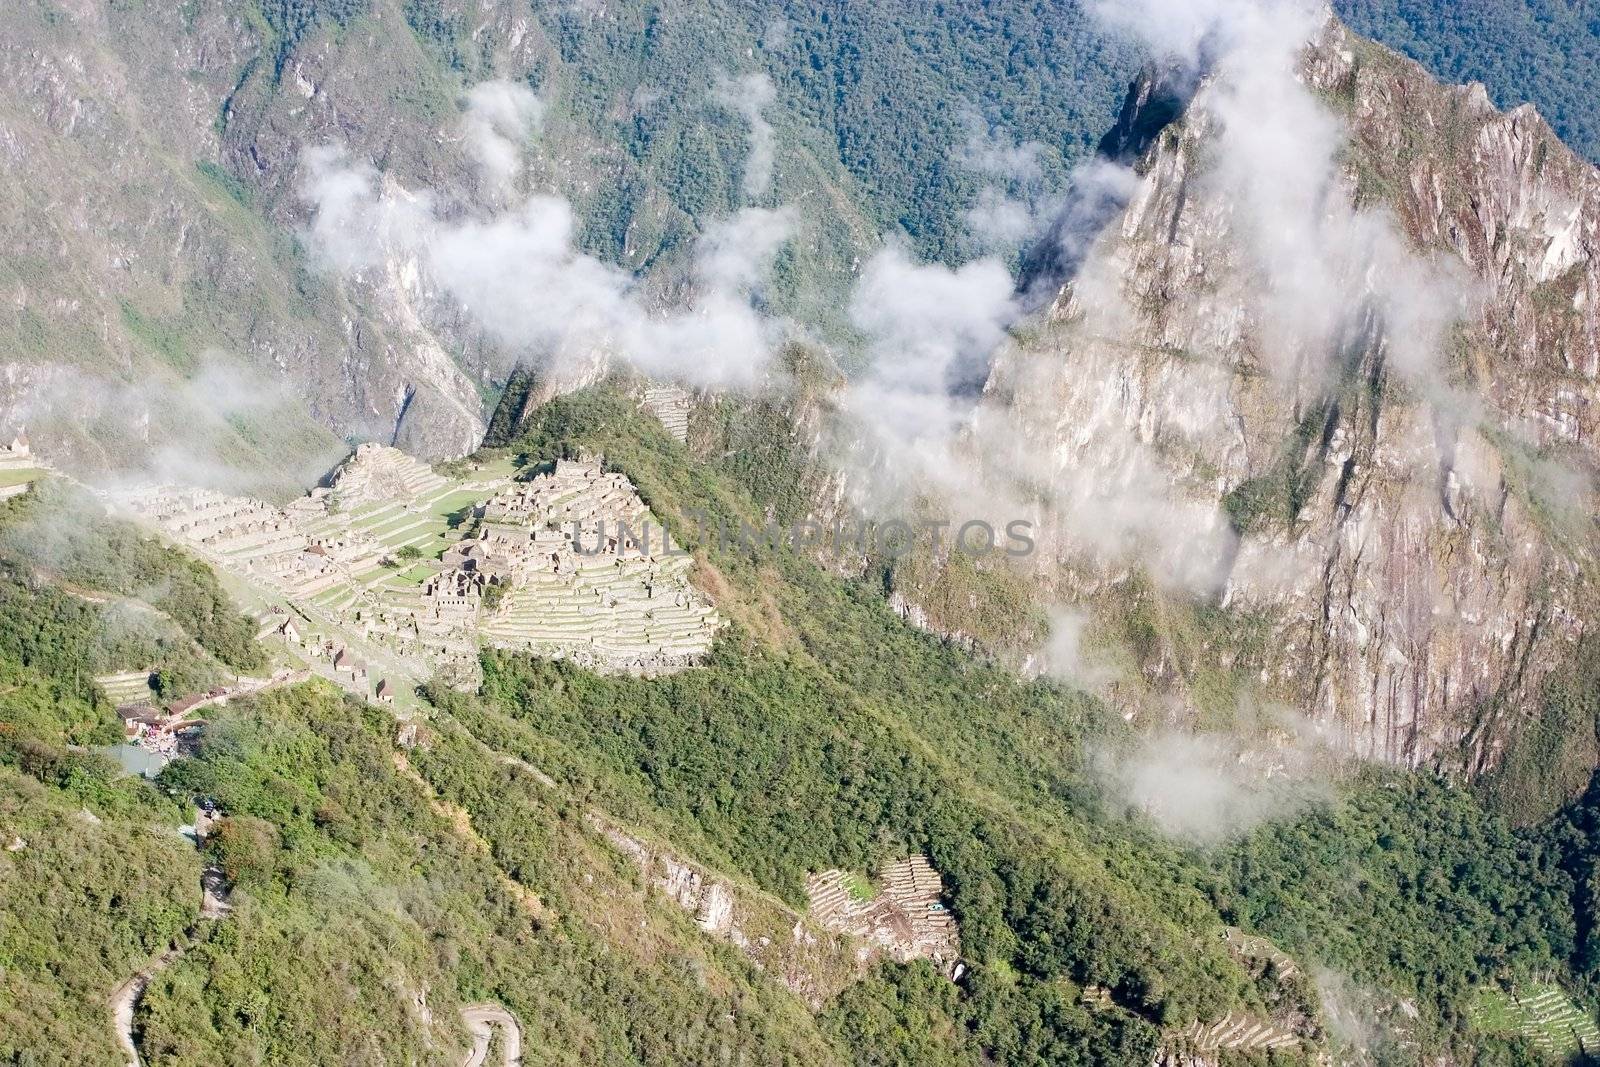 Machu Picchu (Quechua: Machu Picchu, "Old Peak") is a pre-Columbian Inca site located 2,400 meters (7,875 ft) above sea level[1]. It is situated on a mountain ridge above the Urubamba Valley in Peru, which is 80 km (50 mi) northwest of Cusco.